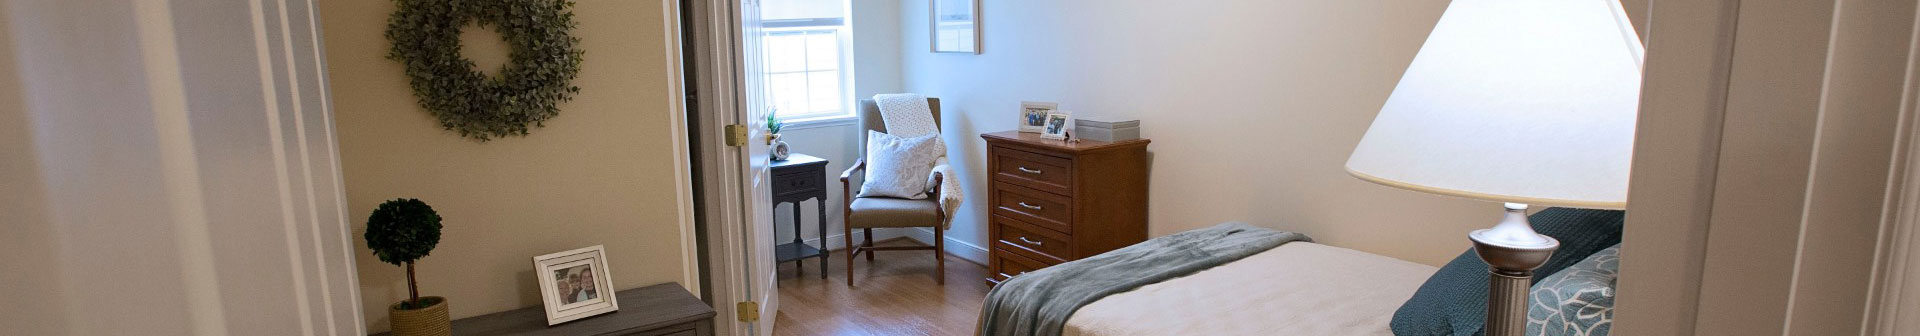 cropped photo of a memory care suite at Artis of Huntingdon Valley